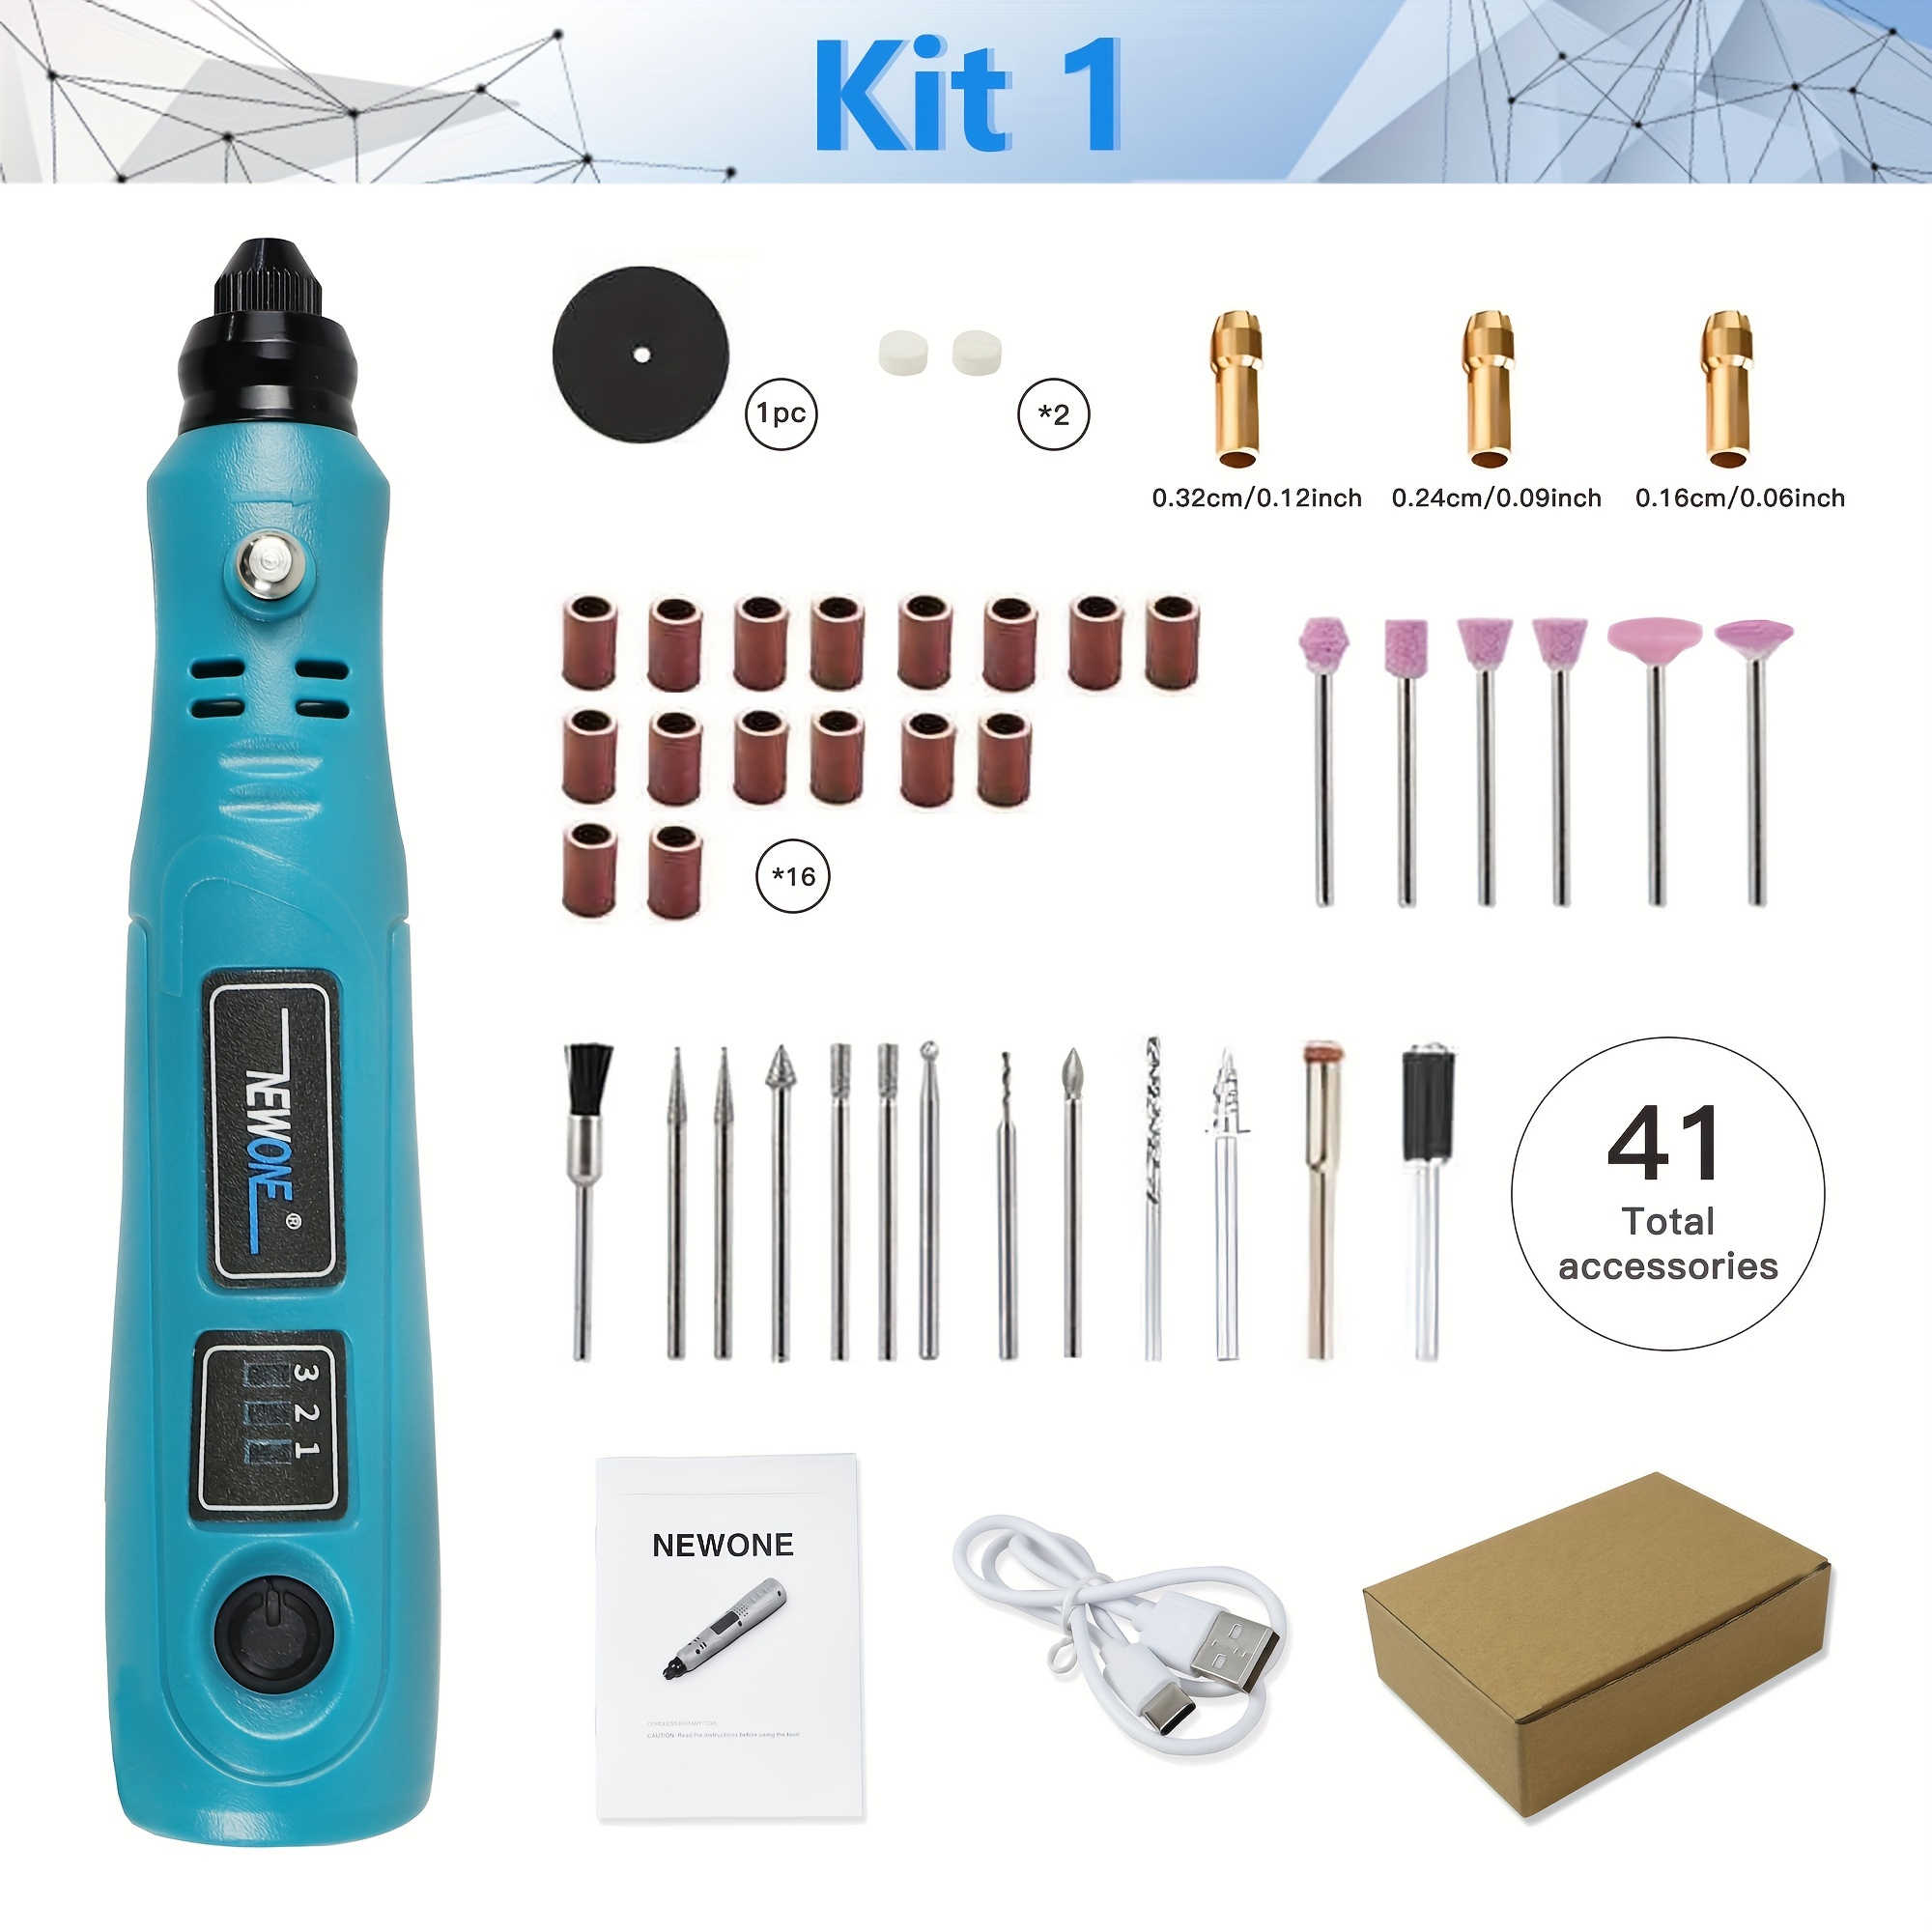 T-Tech Wholesale Wireless Rotary Tool 8V USB Charging 5-Speed 8000-29000rpm  Power Rotary Tool Kit Small DIY Projects - China Electric Mini Grinder,  Original Wireless Drills Nails